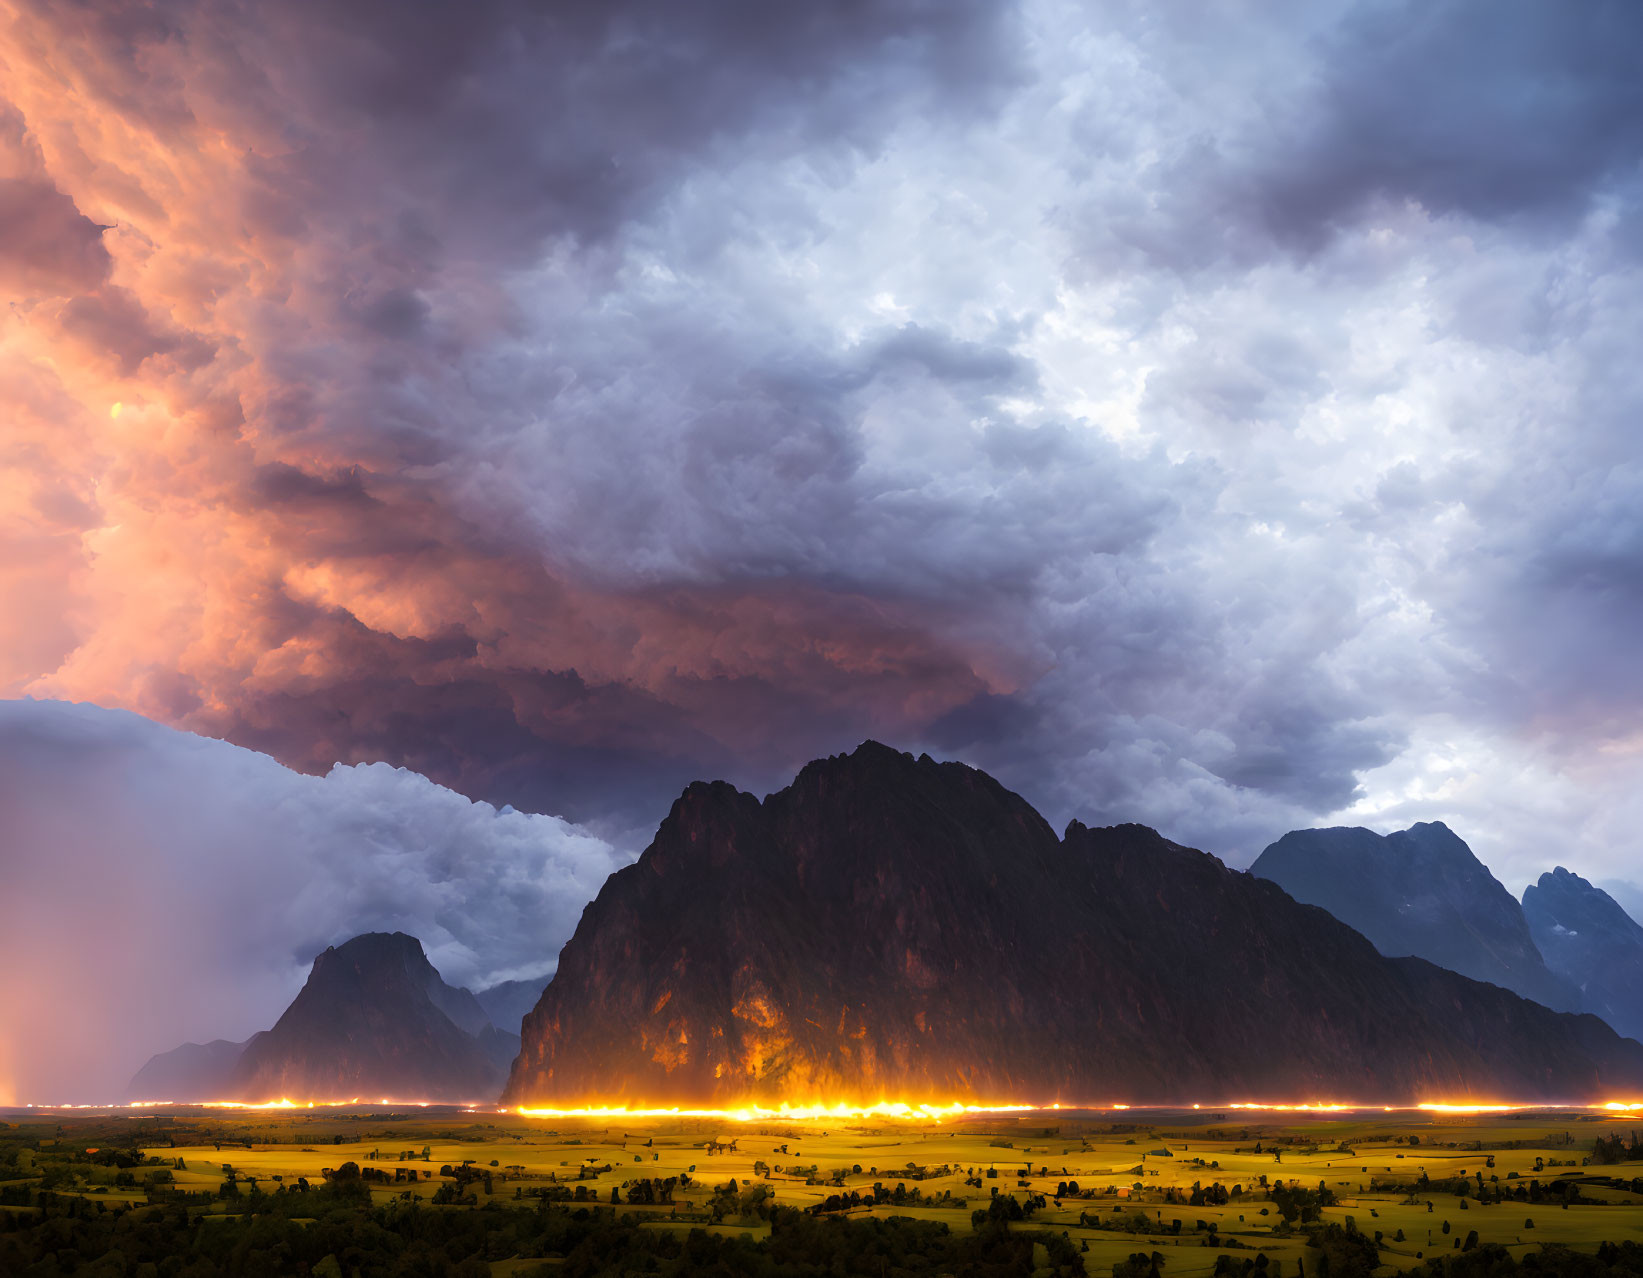 Dramatic landscape of wildfire near towering mountains at sunset